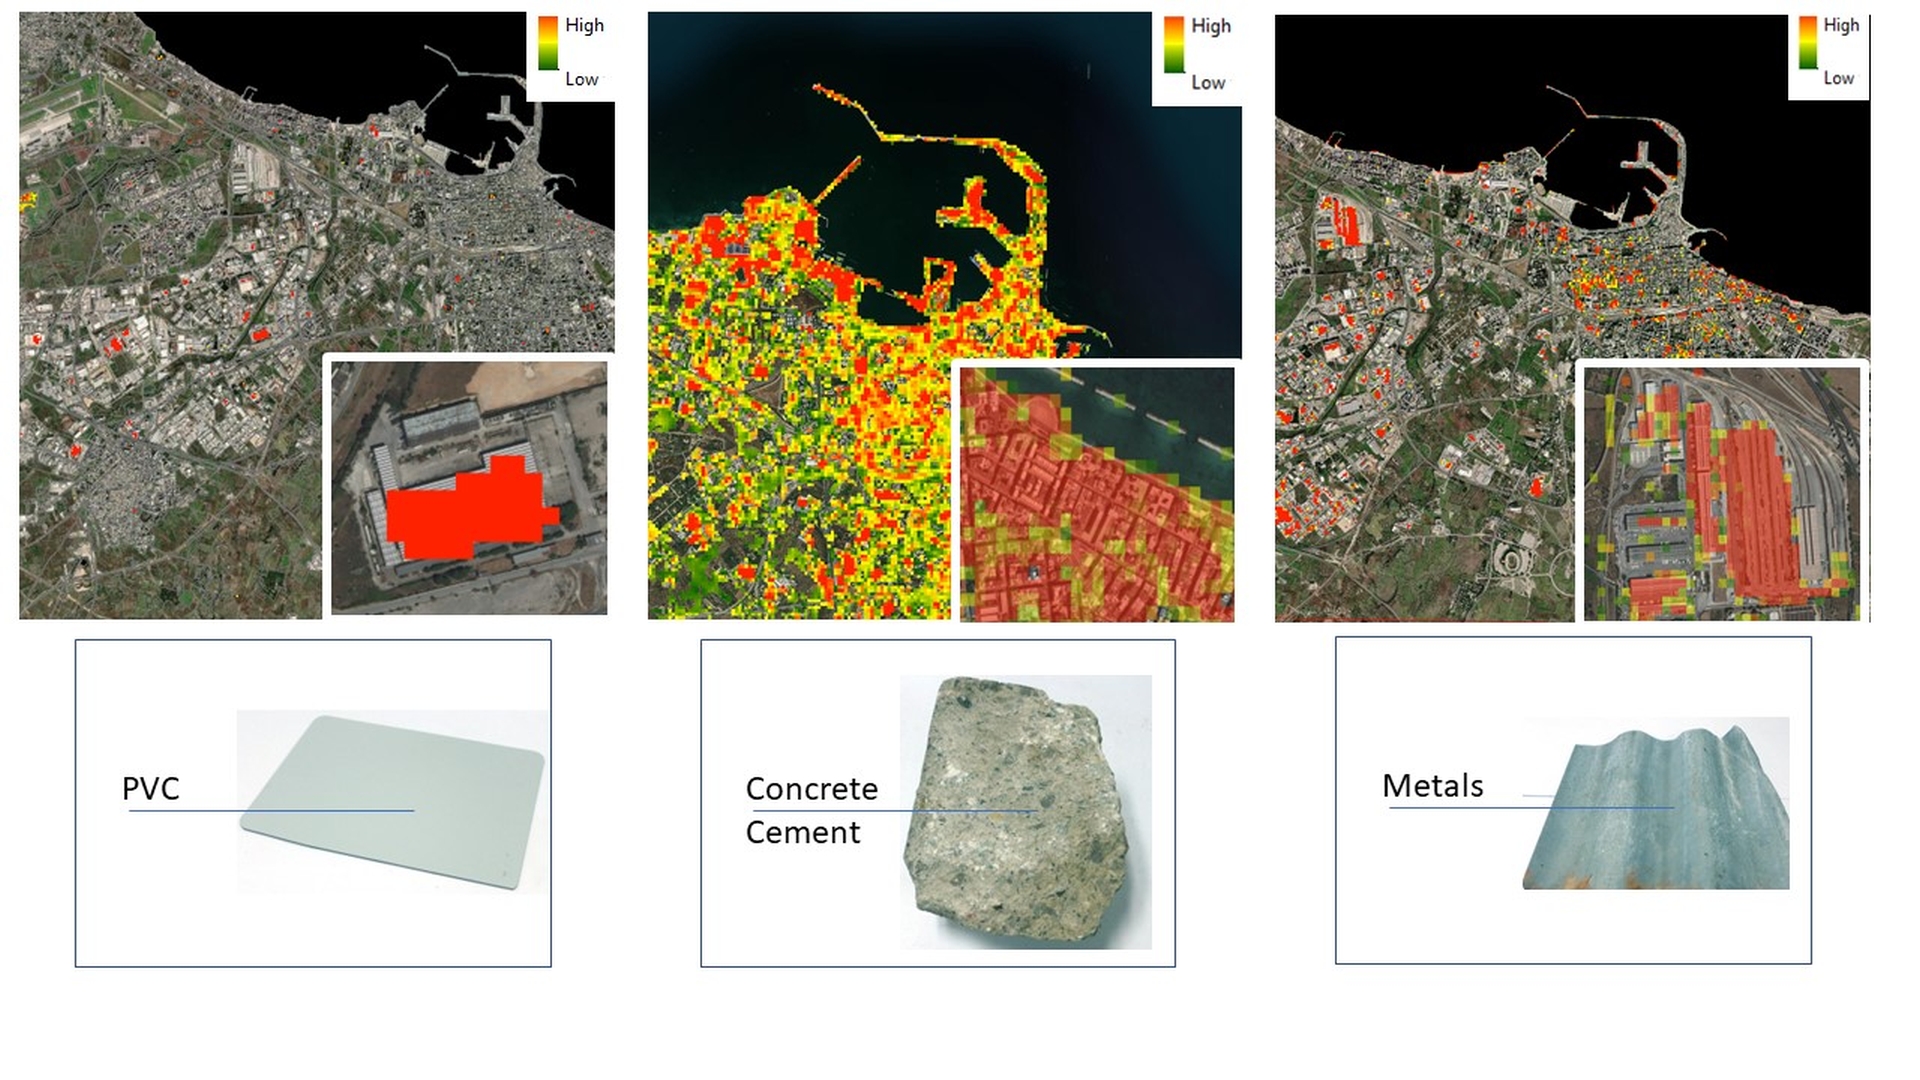 ASI - PRISMA for extraction of cover materials in urban areas